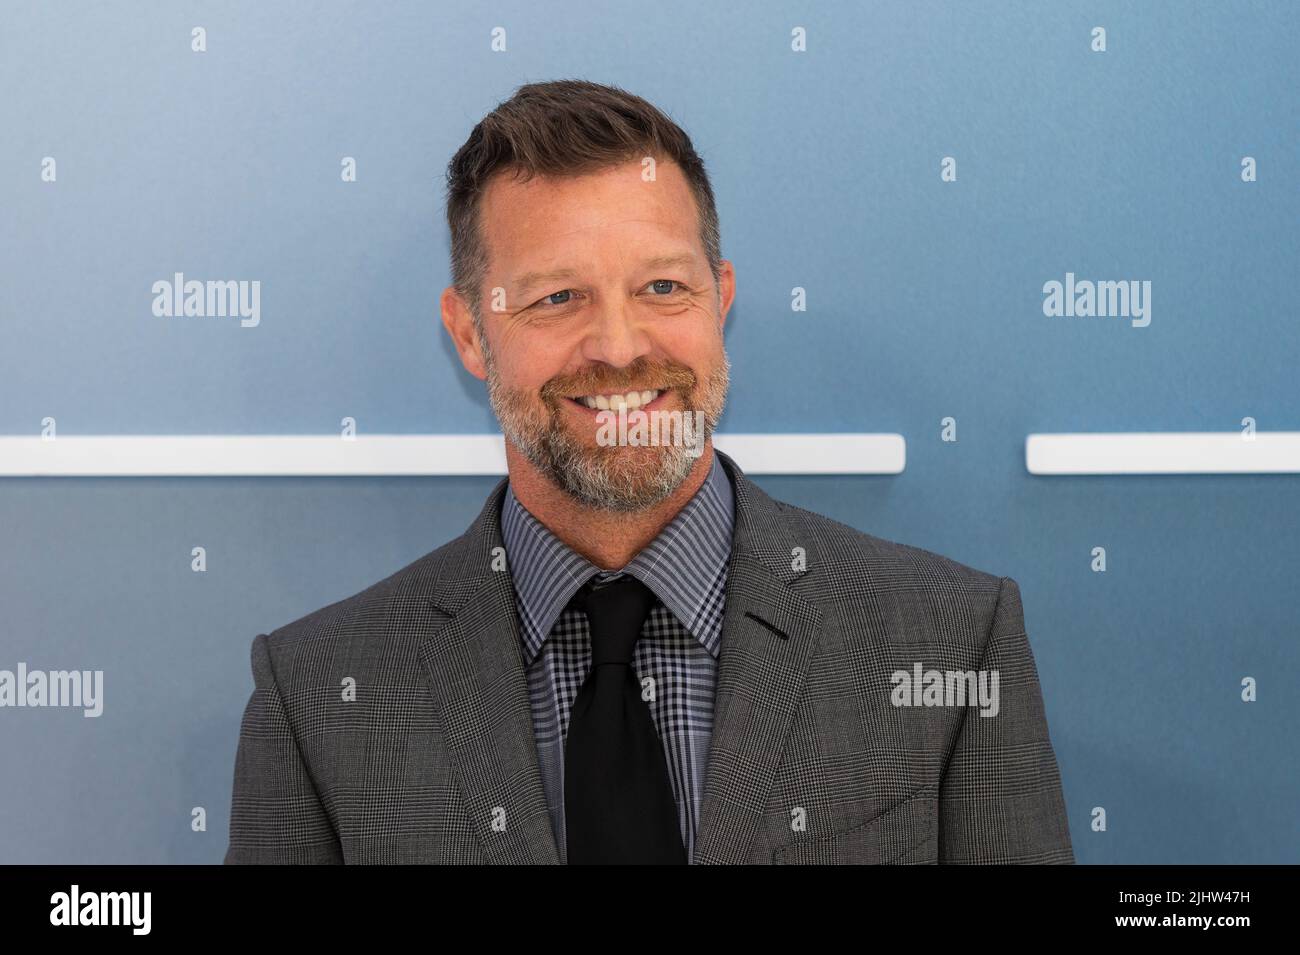 London, UK. 20 July 2022. Director David Leitch attends the UK gala screening of the movie ‘Bullet Train’ at Cineworld Leicester Square.  Credit: Stephen Chung / Alamy Live News Stock Photo